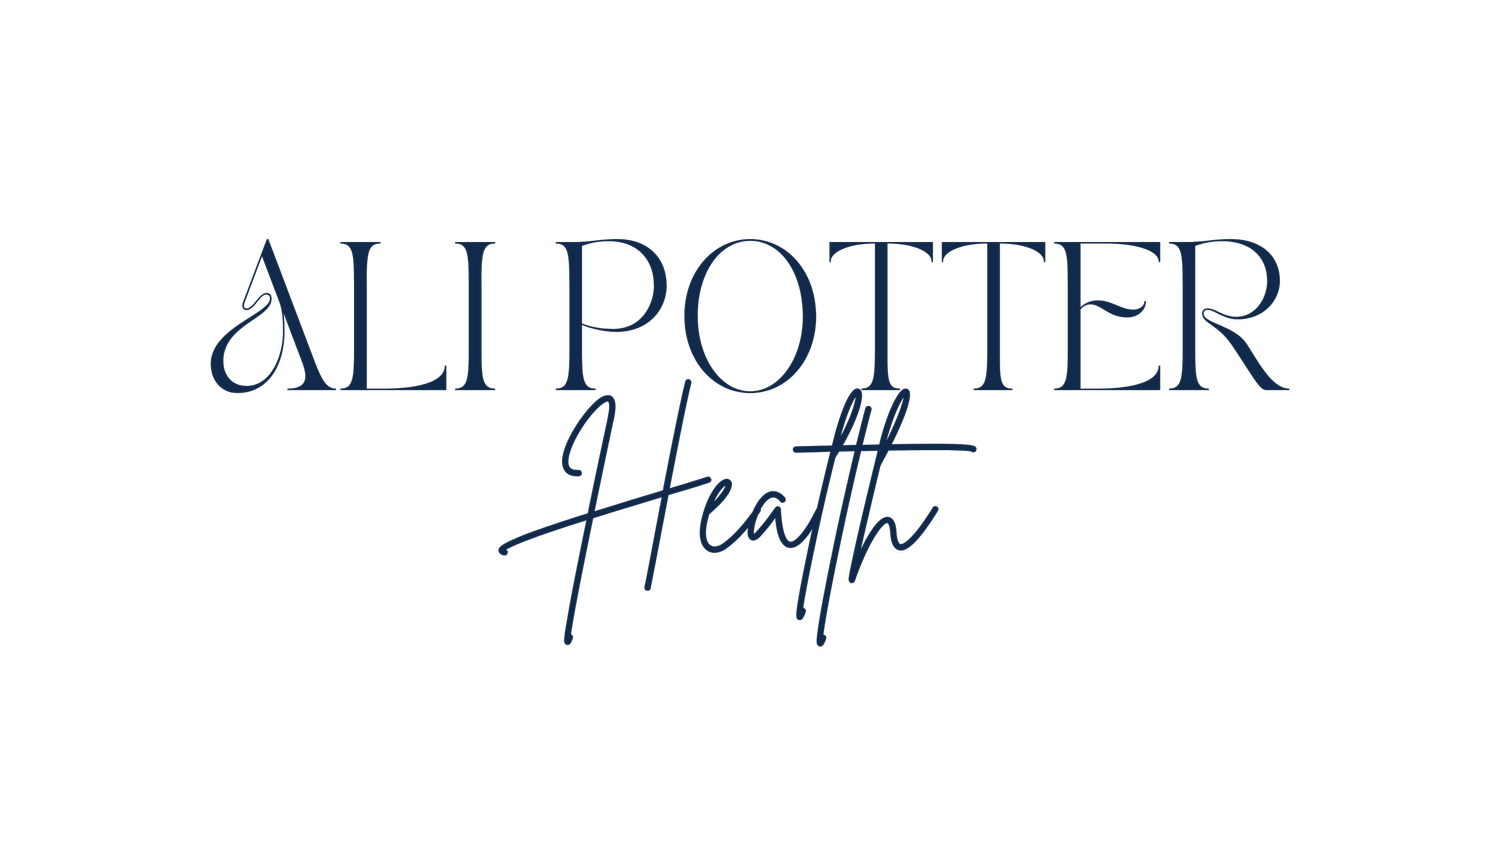 Ali Potter - Osteopath, Health &amp; Wellbeing Clinic